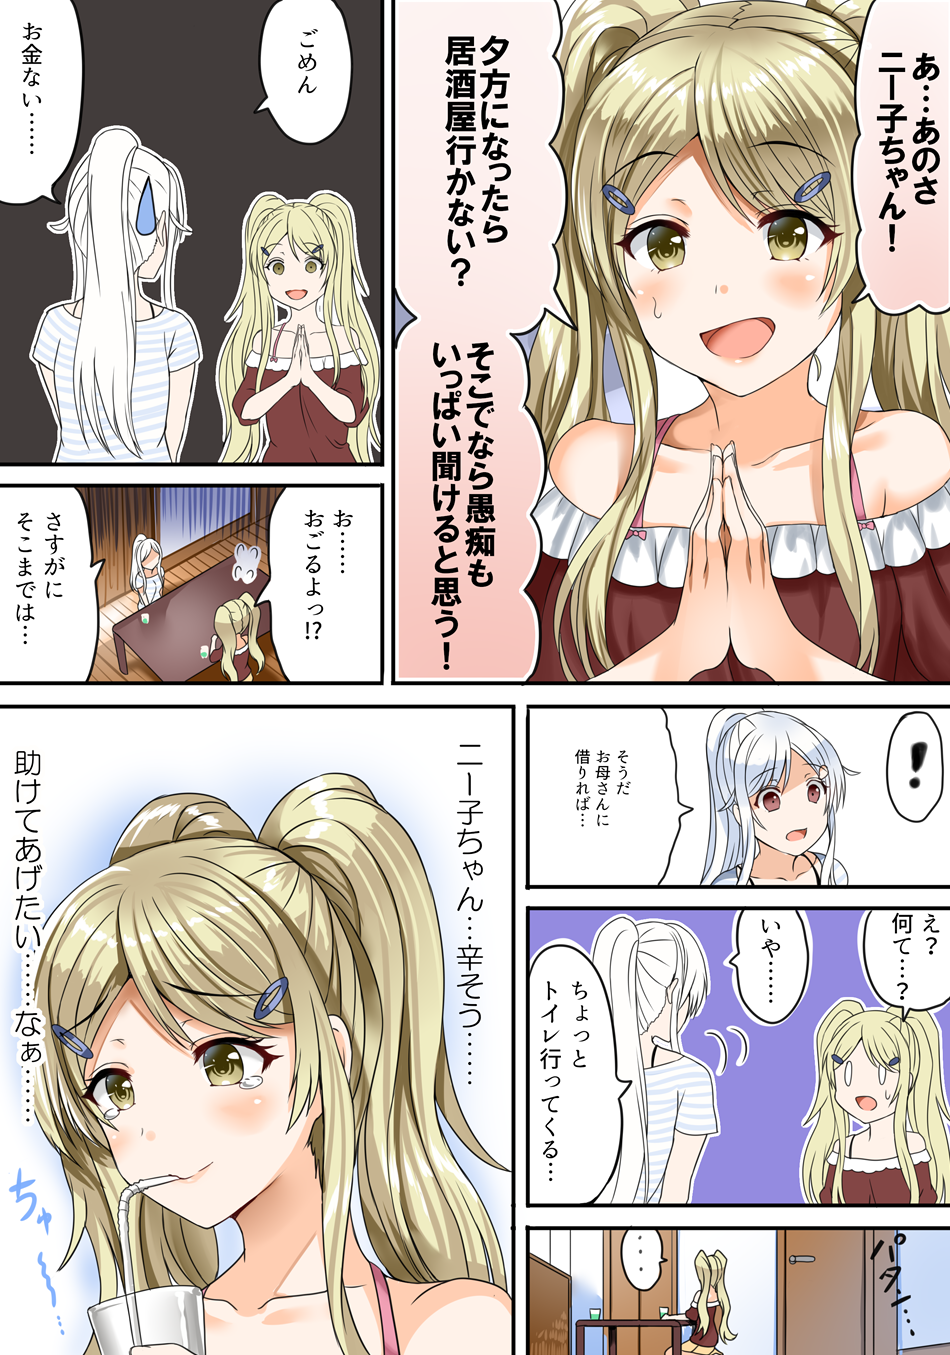 2girls :d aldehyde blonde_hair comic cup drinking_glass drinking_straw eyebrows_visible_through_hair hands_together highres long_hair multiple_girls neeko open_mouth original ponytail silver_hair smile sweatdrop table tears translation_request twintails